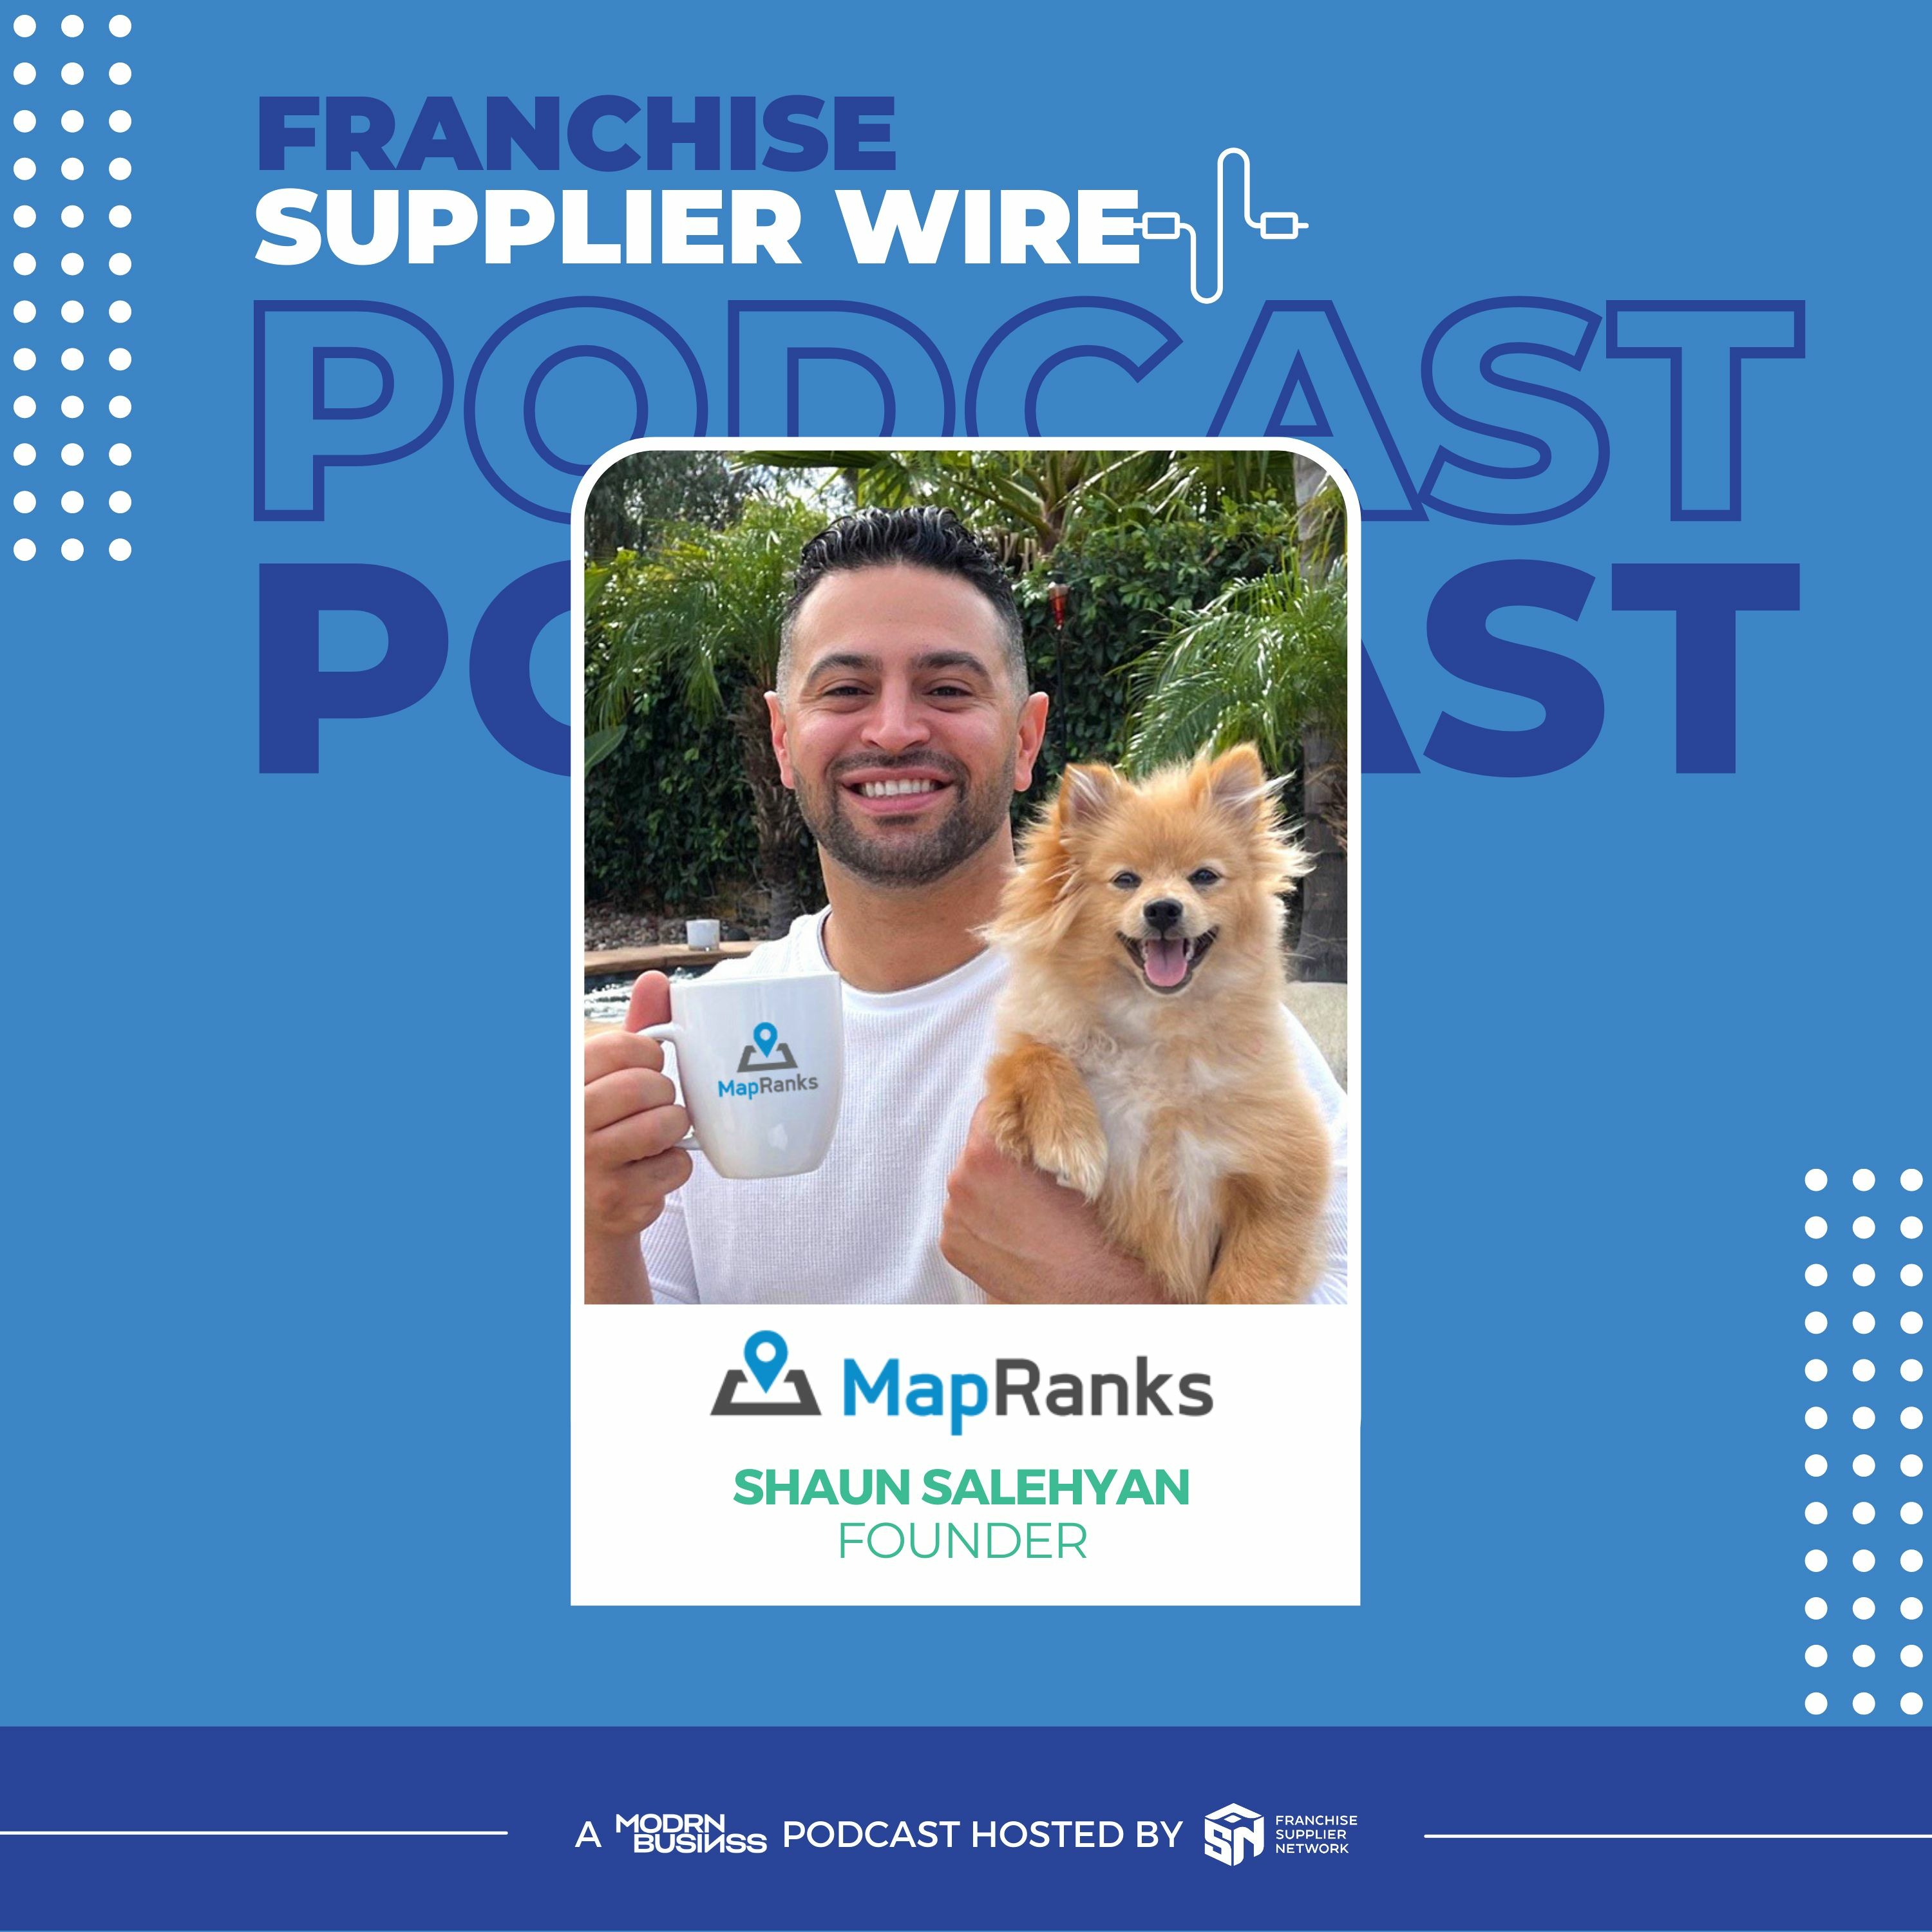 Supplier Wire 009: How To Dominate Google Maps, with Shaun Salehyan - CEO of Map Ranks